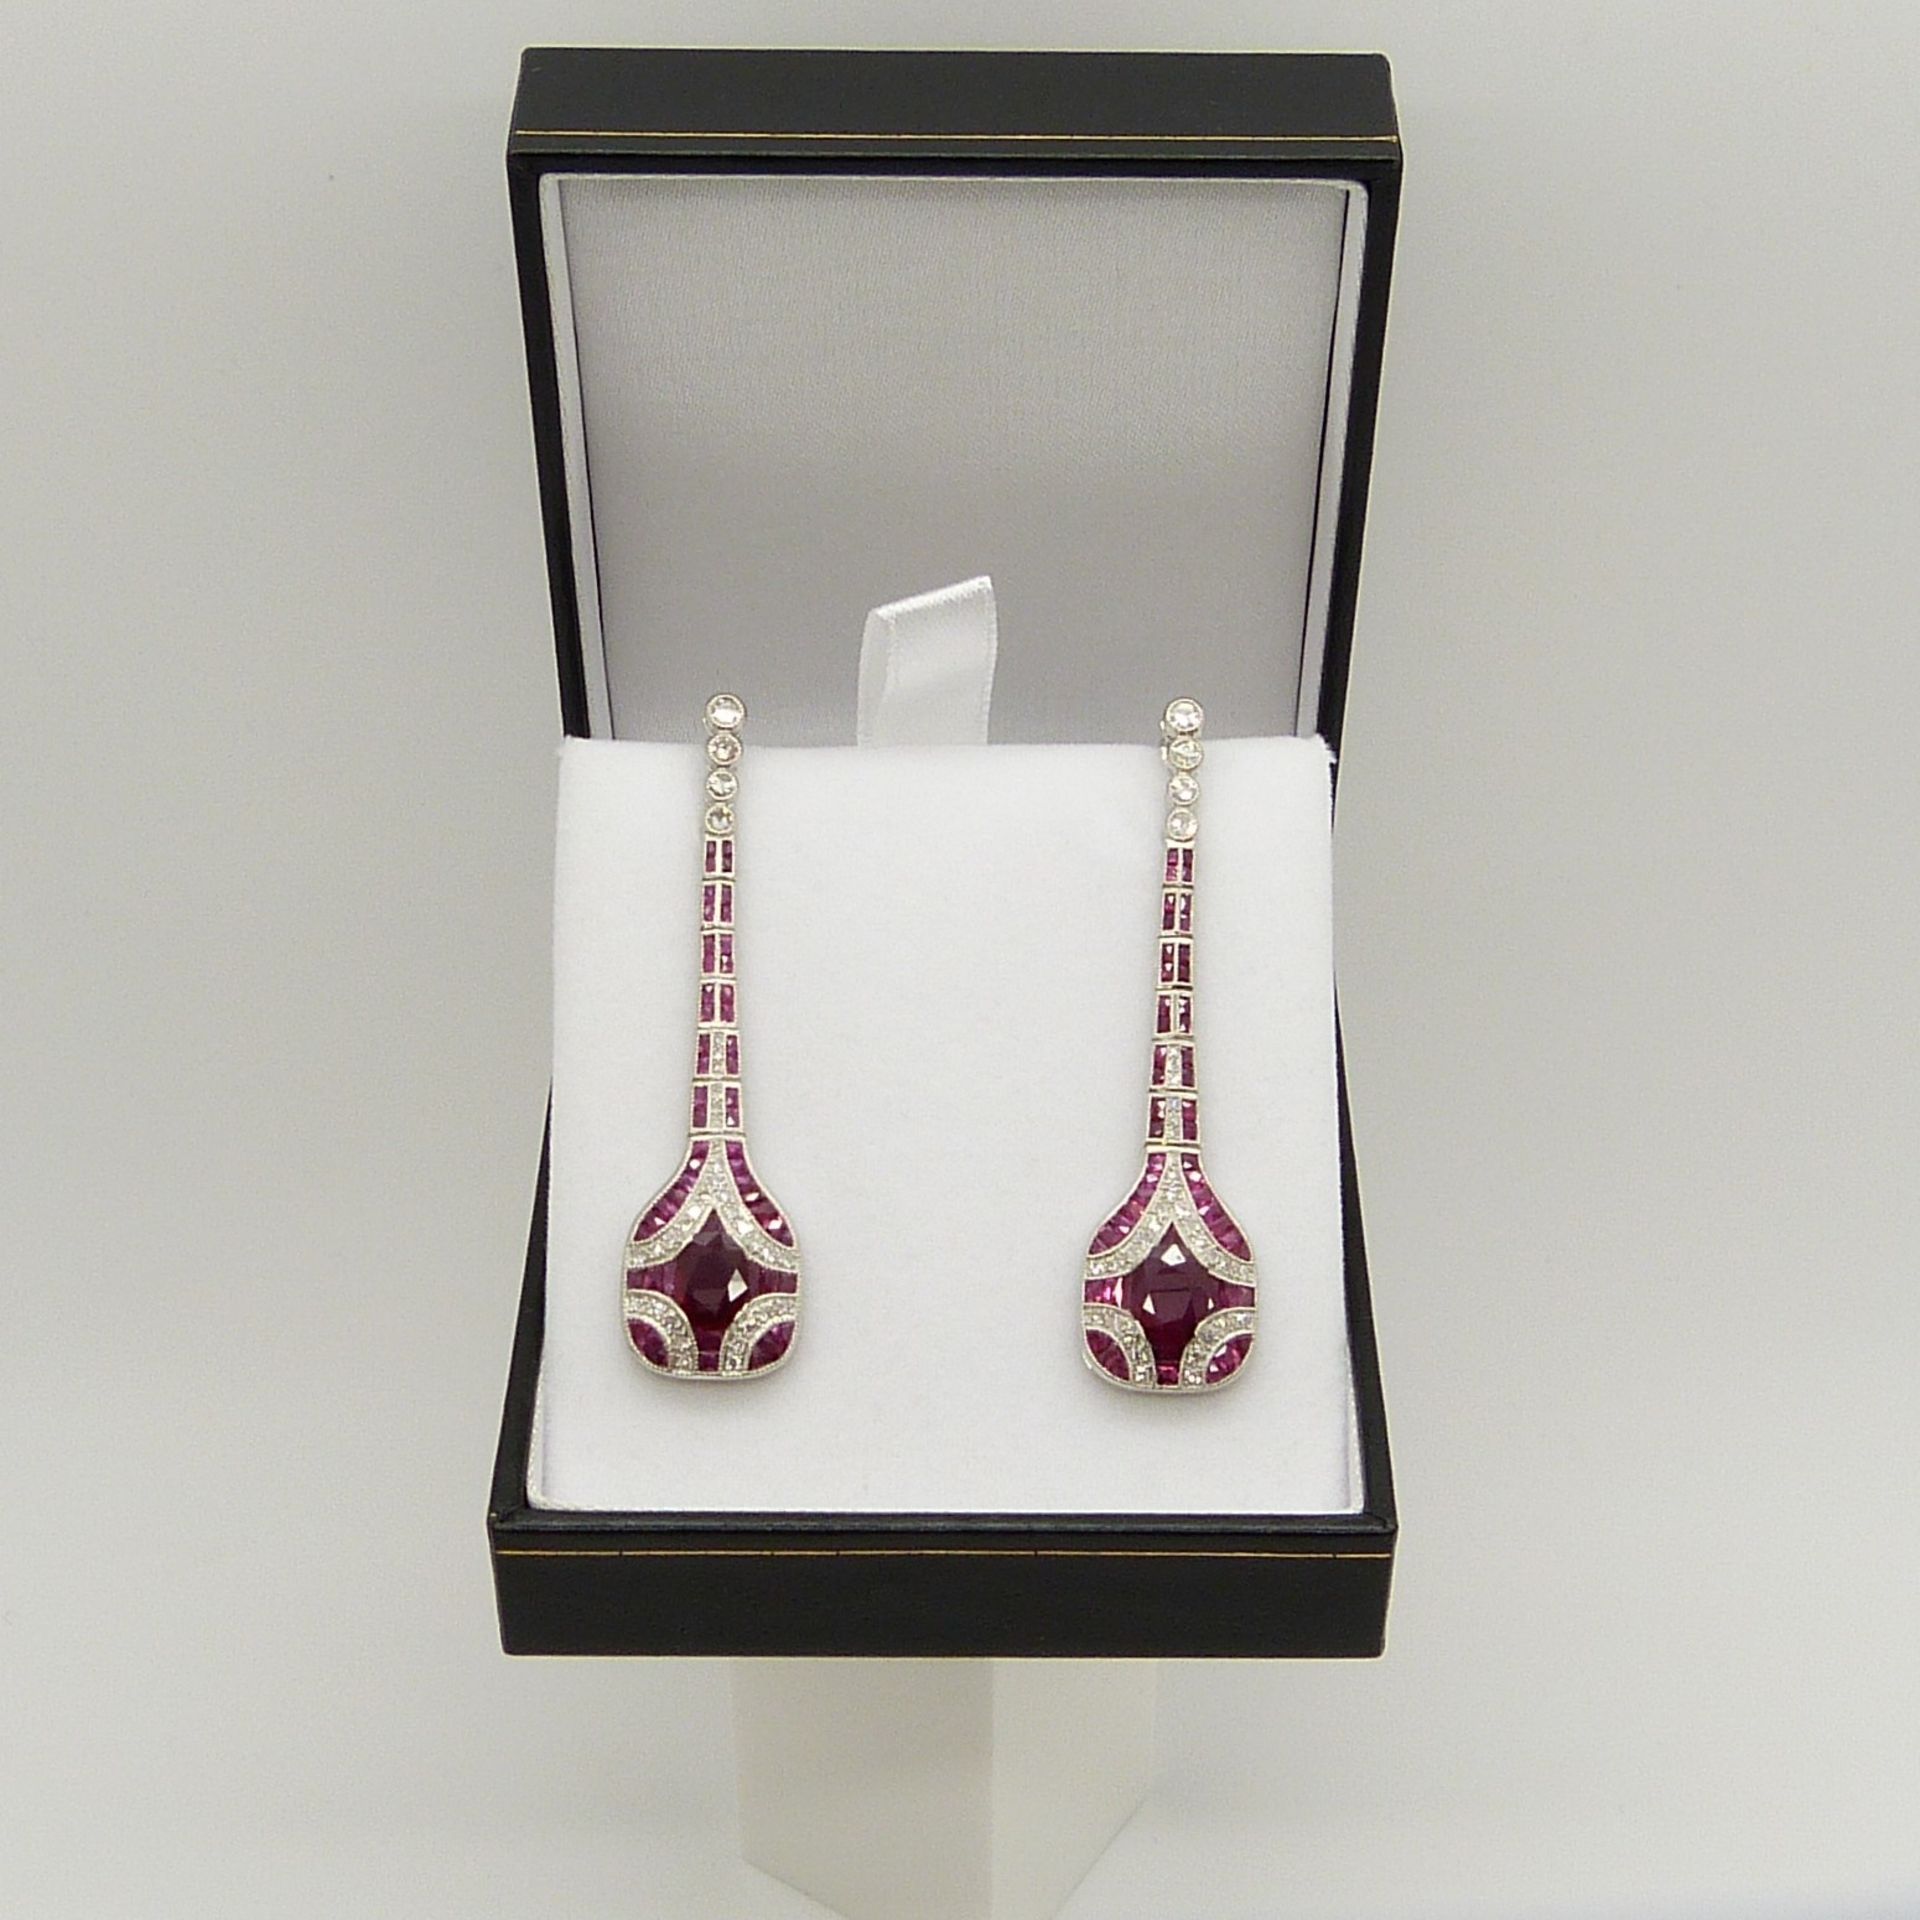 Long platinum Art Deco-style drop earrings set with rubies and diamonds - Image 4 of 9